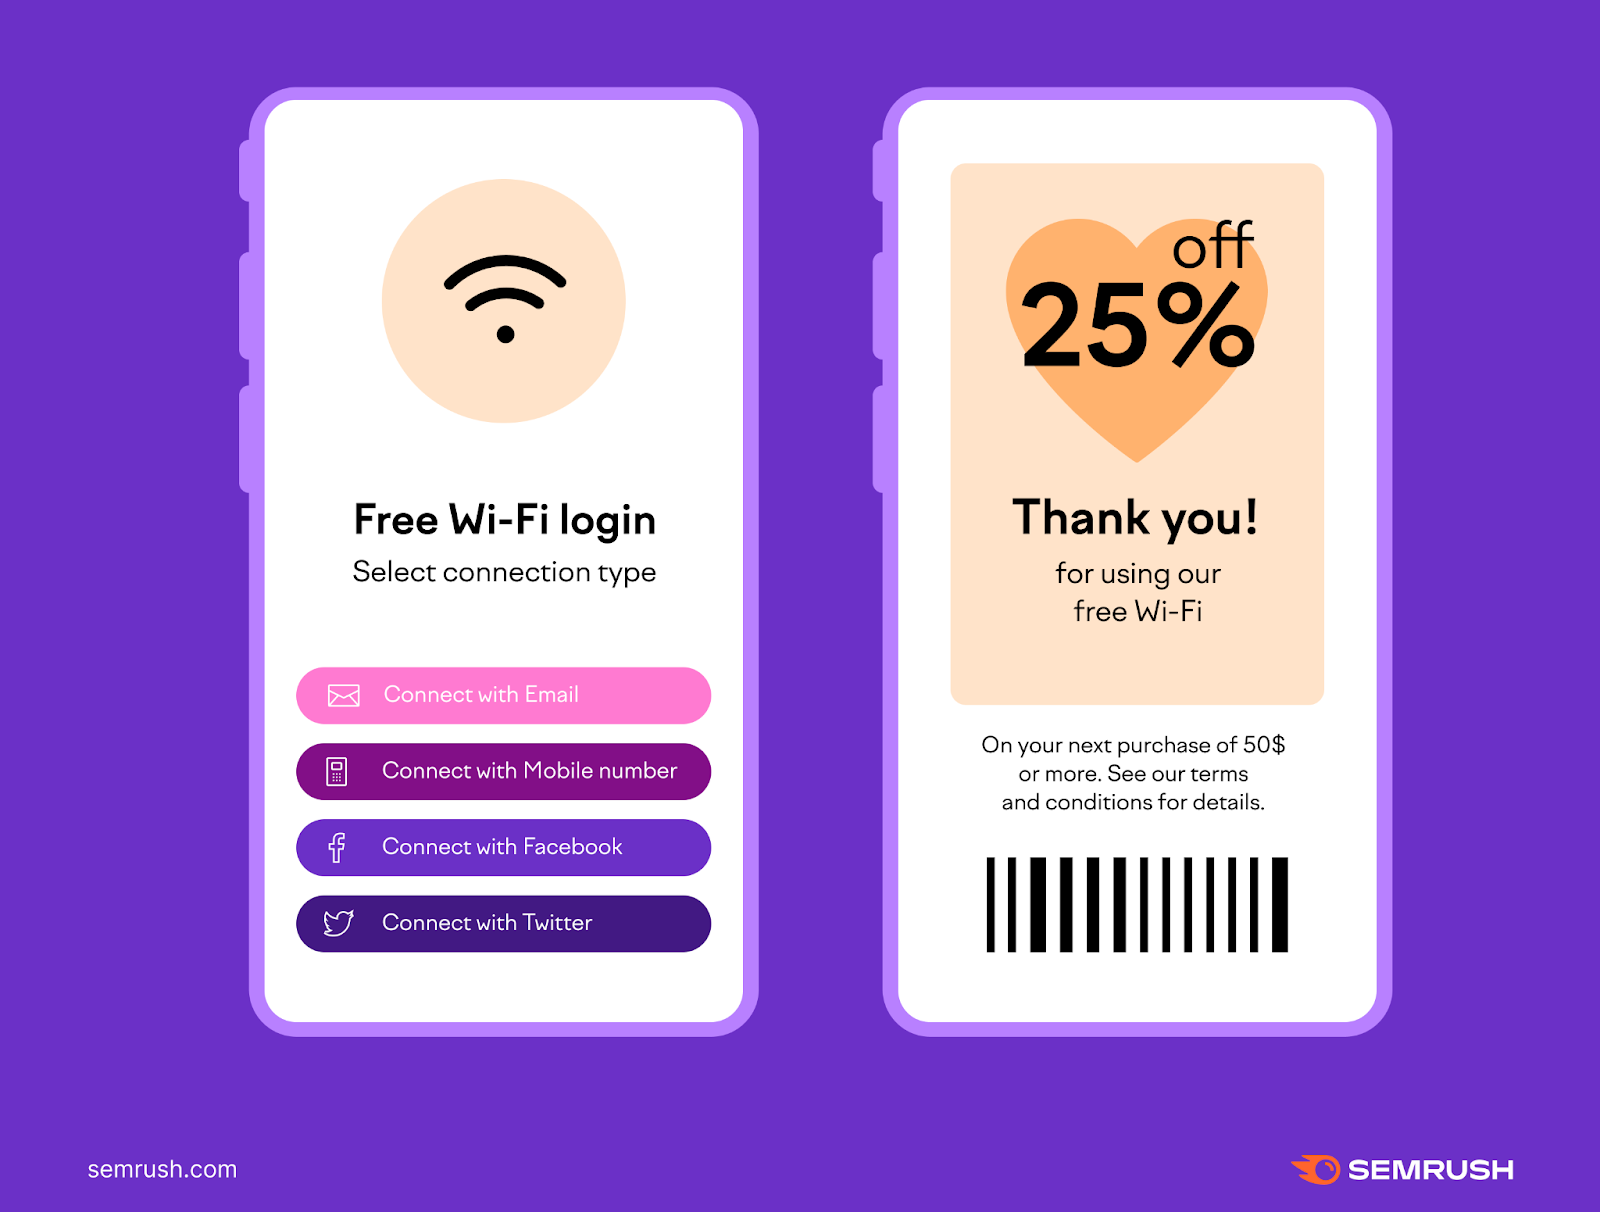 A free Wi-Fi login (left) and a thank you page (right)